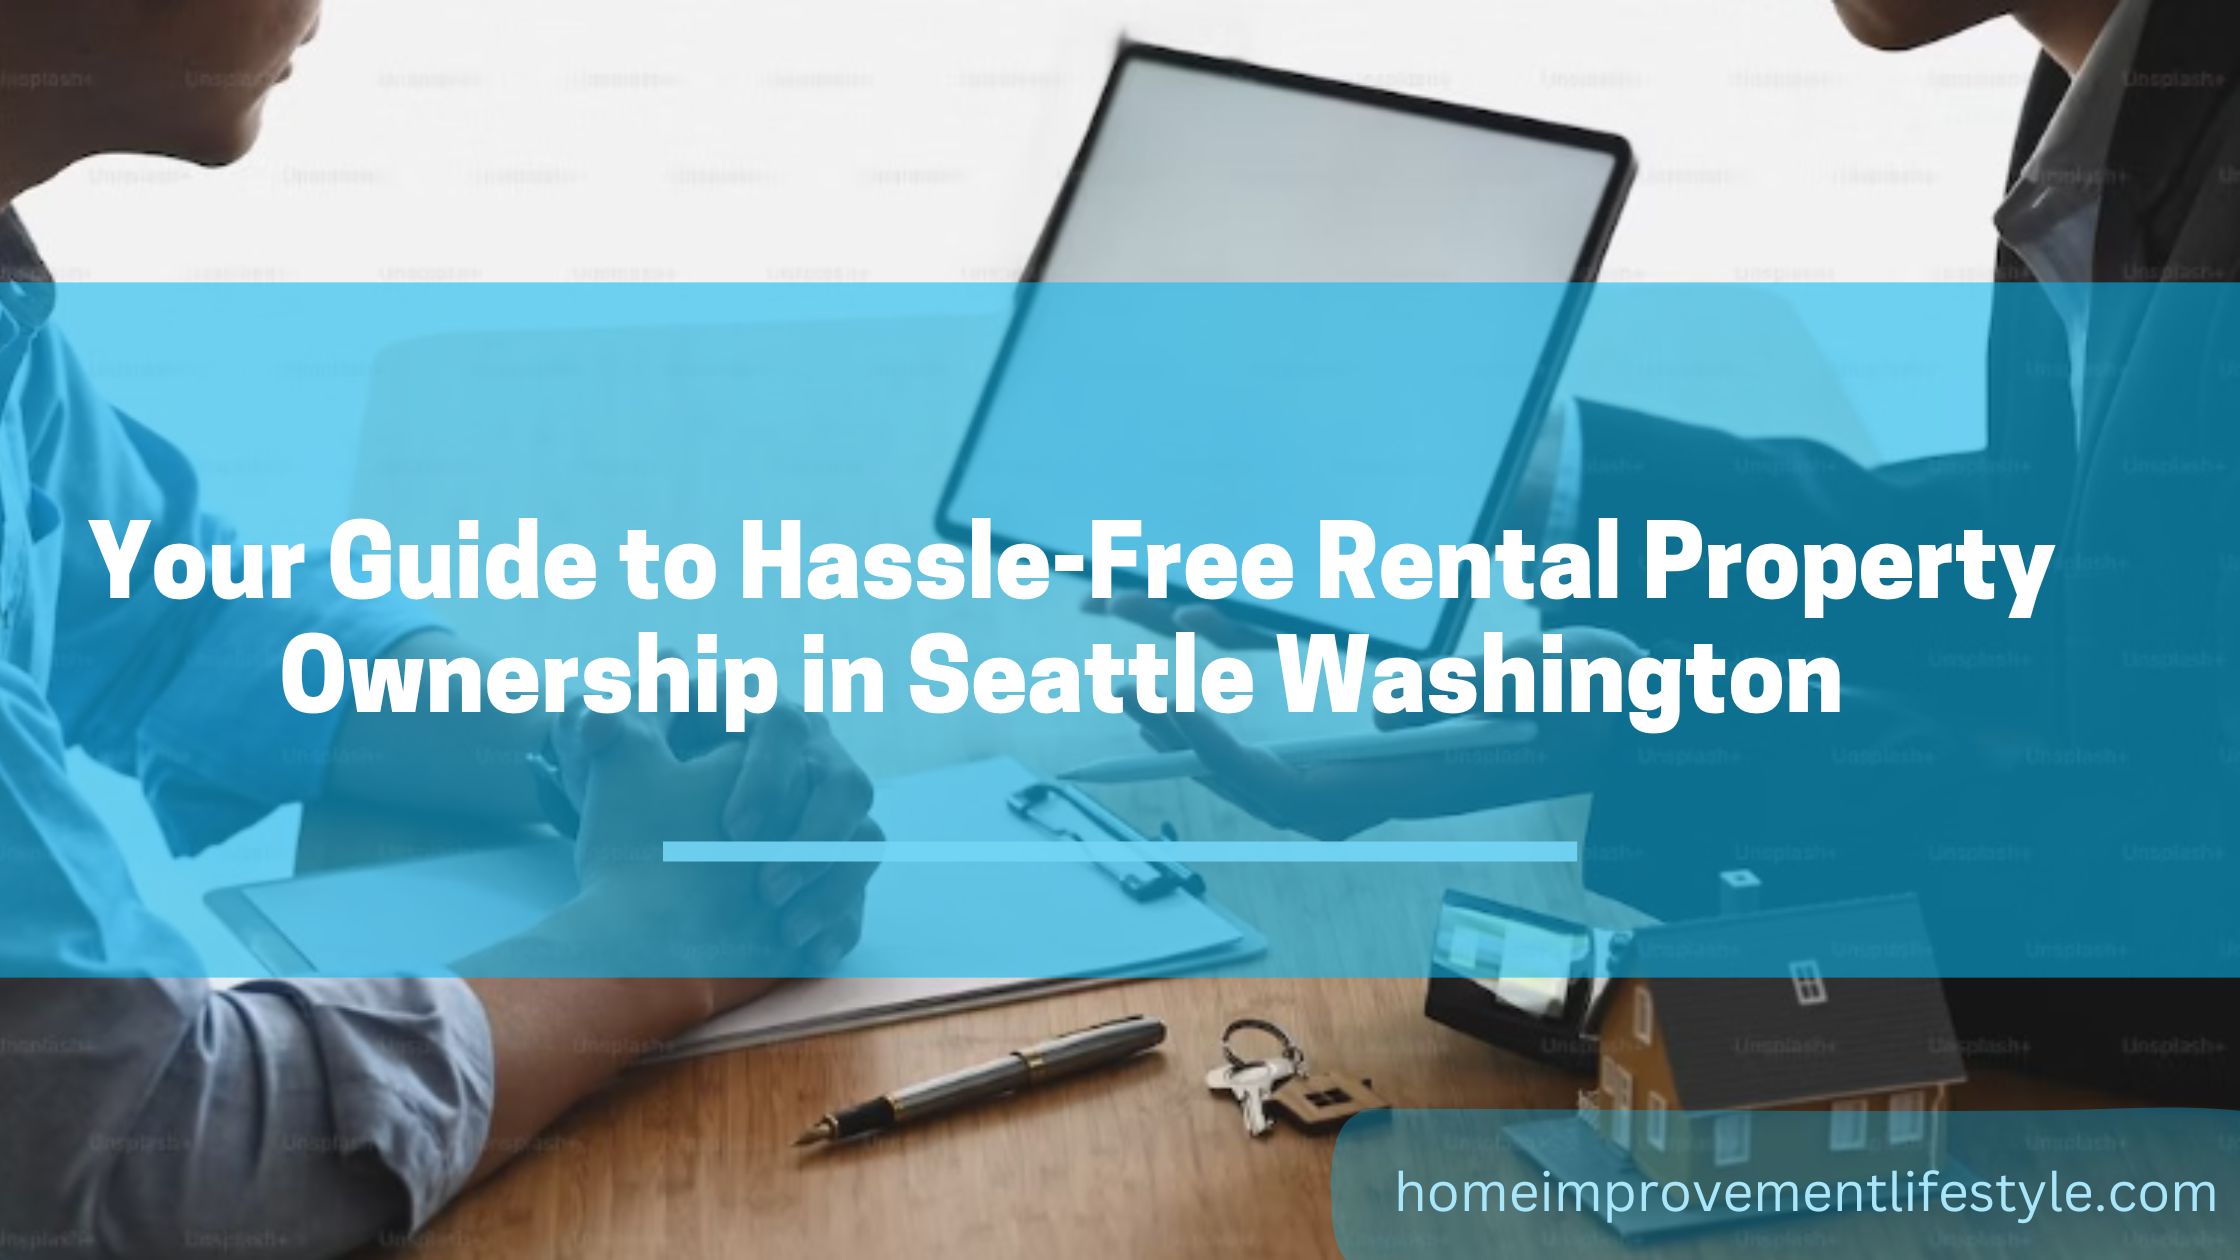 Your Guide to Hassle-Free Rental Property Ownership in Seattle Washington